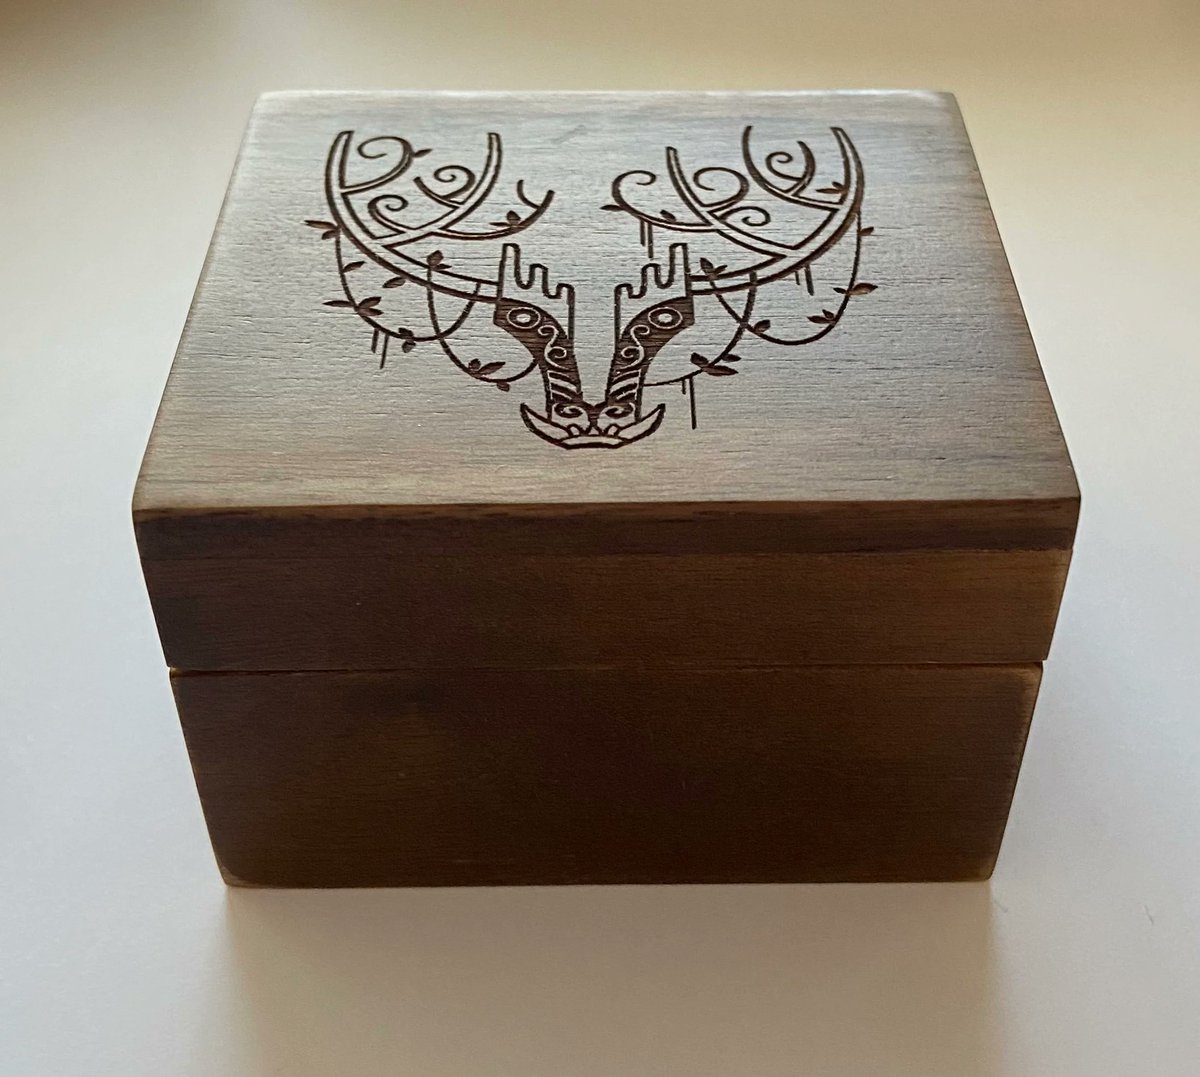 🎶LIMITED RELEASE🎶
We have a few music boxes left over from our OST Kickstarter! The custom Yunsheng mechanism inside can be wound to play a verse of 'Something In The Woods'. 

Get it while it lasts!
worldwalker-games.myshopify.com/products/wilde…

#gamemerch #indiegame #limitedrelease #gamemusic